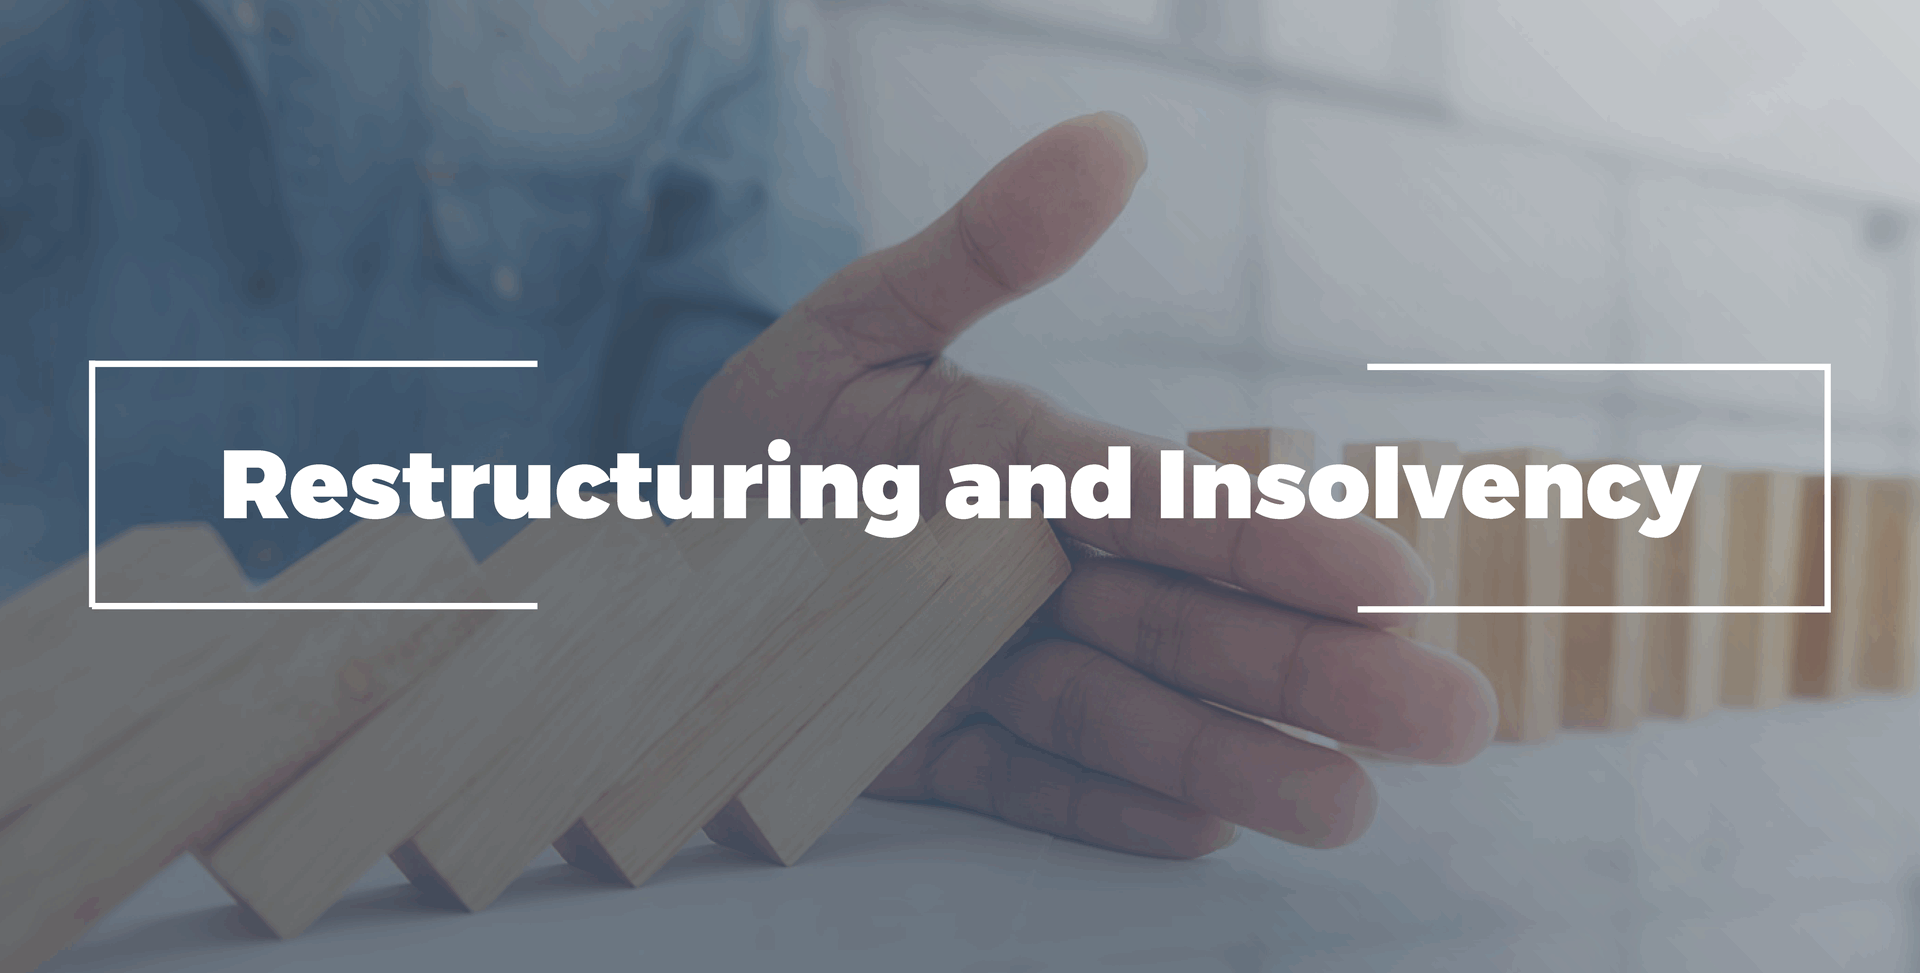 Restructuring and Insolvency